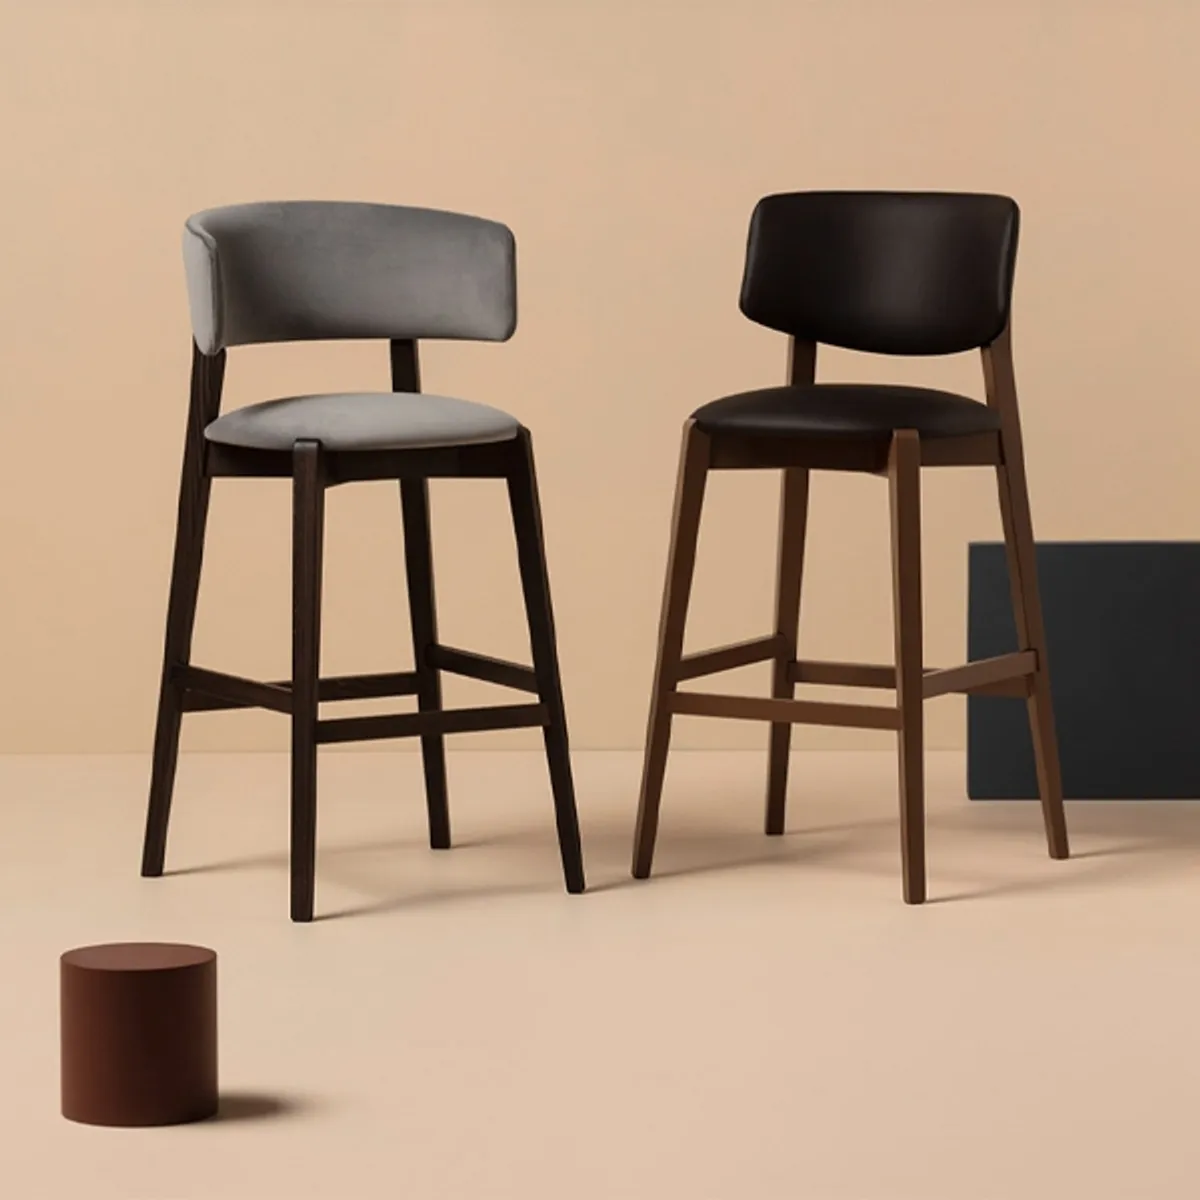 Louisiana bar stool warms Inside Out Contracts2